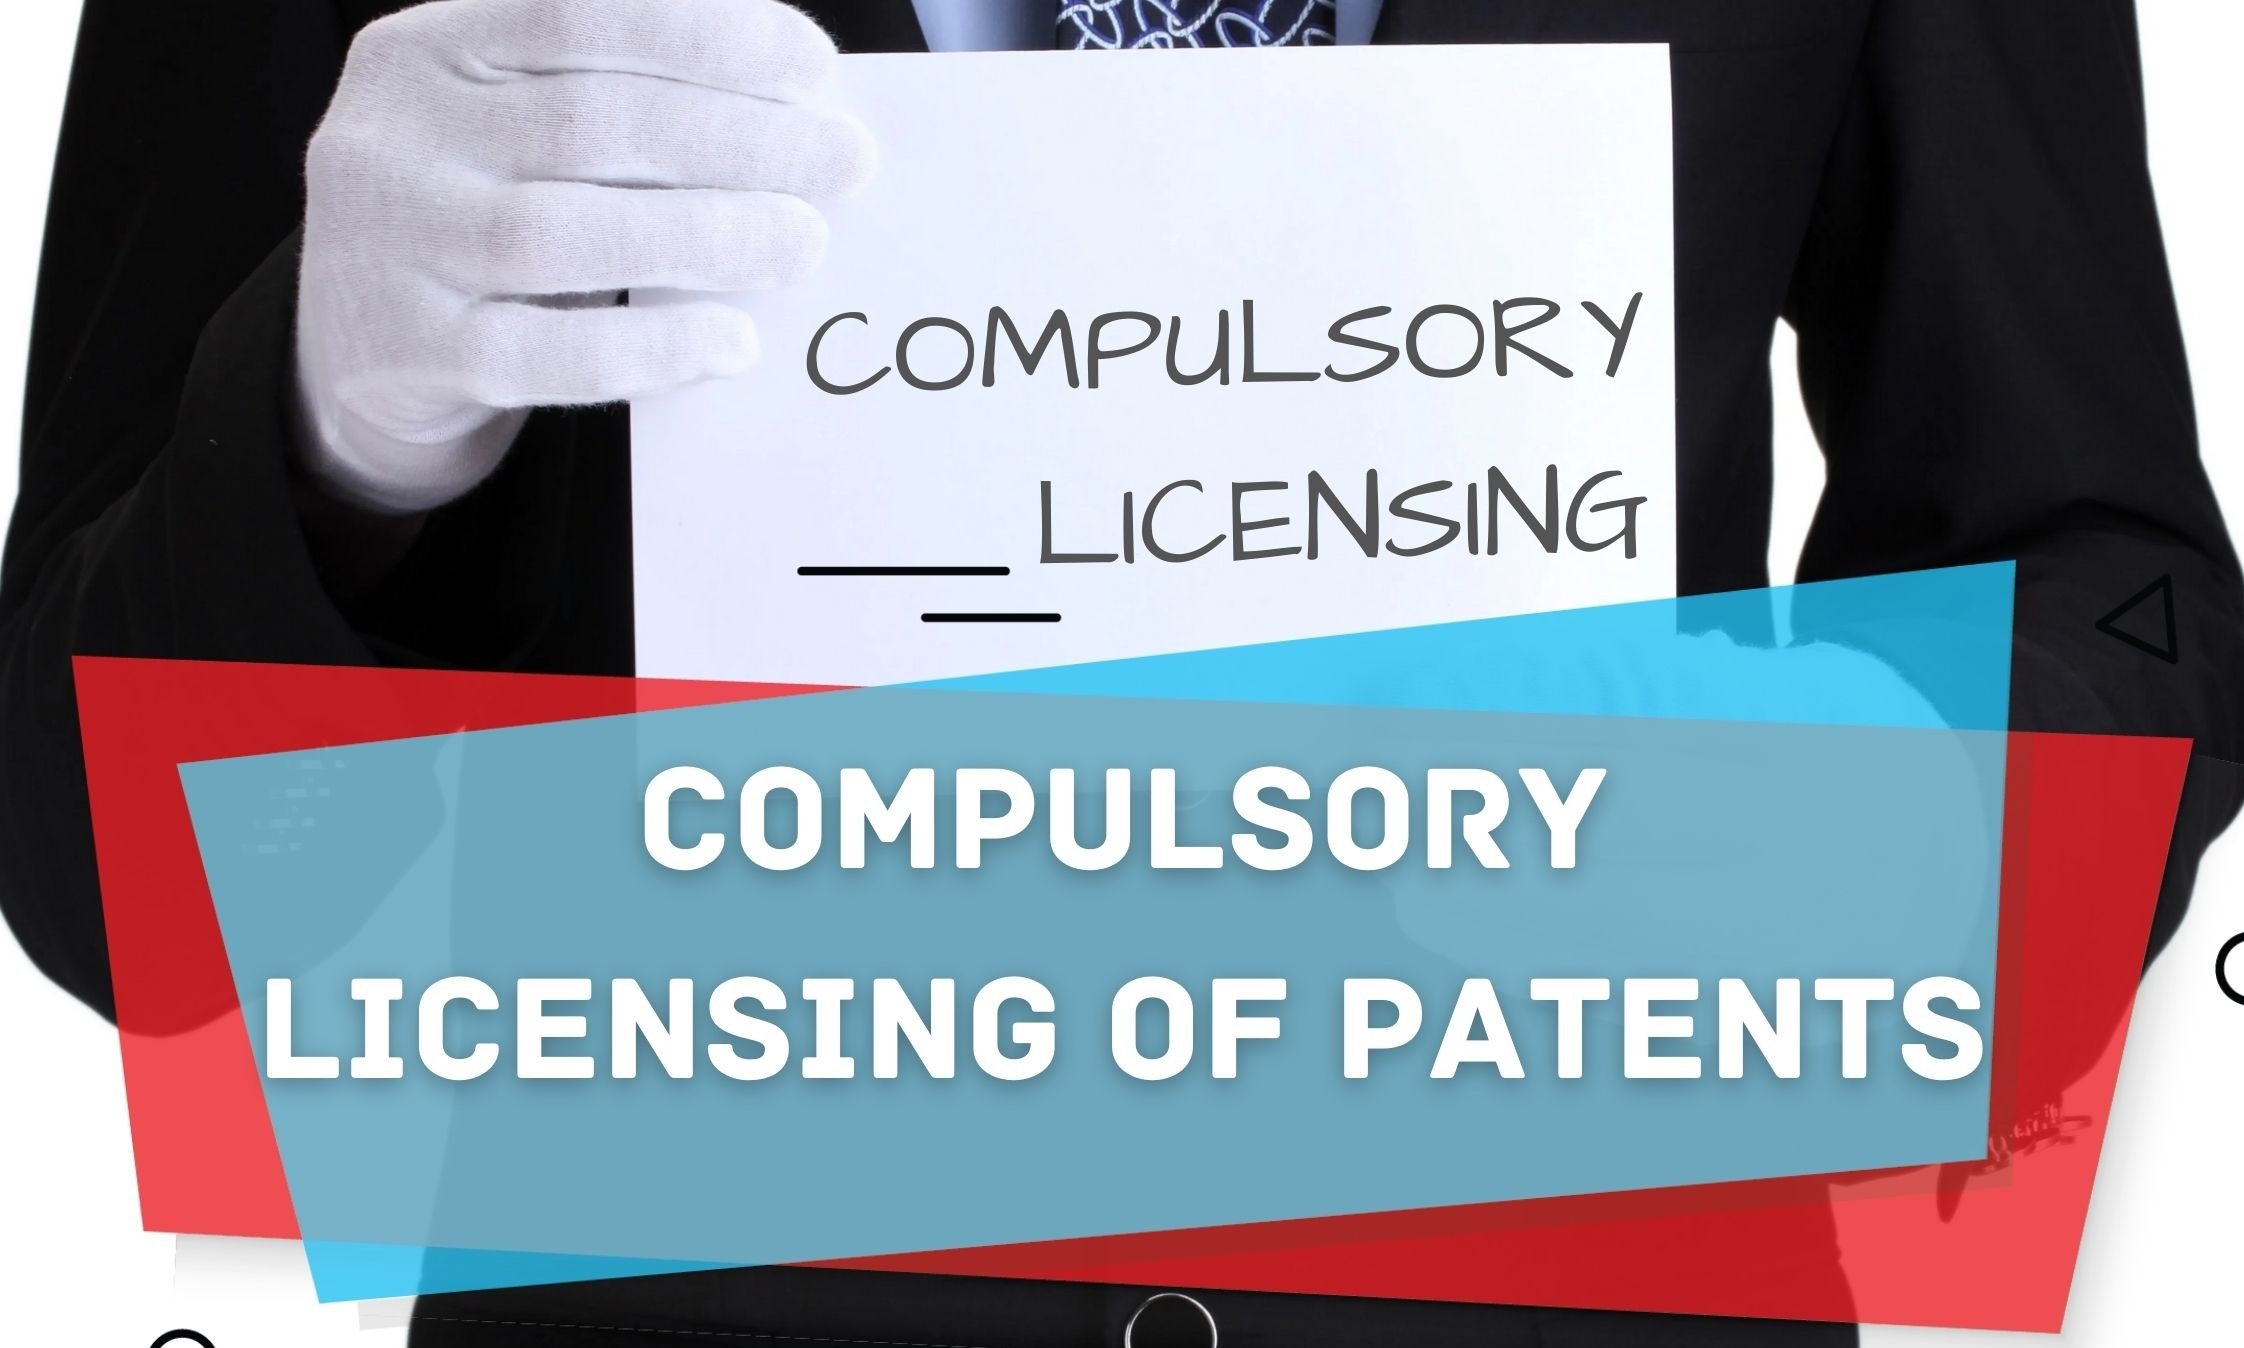 COMPULSORY LICENSING OF PATENTS